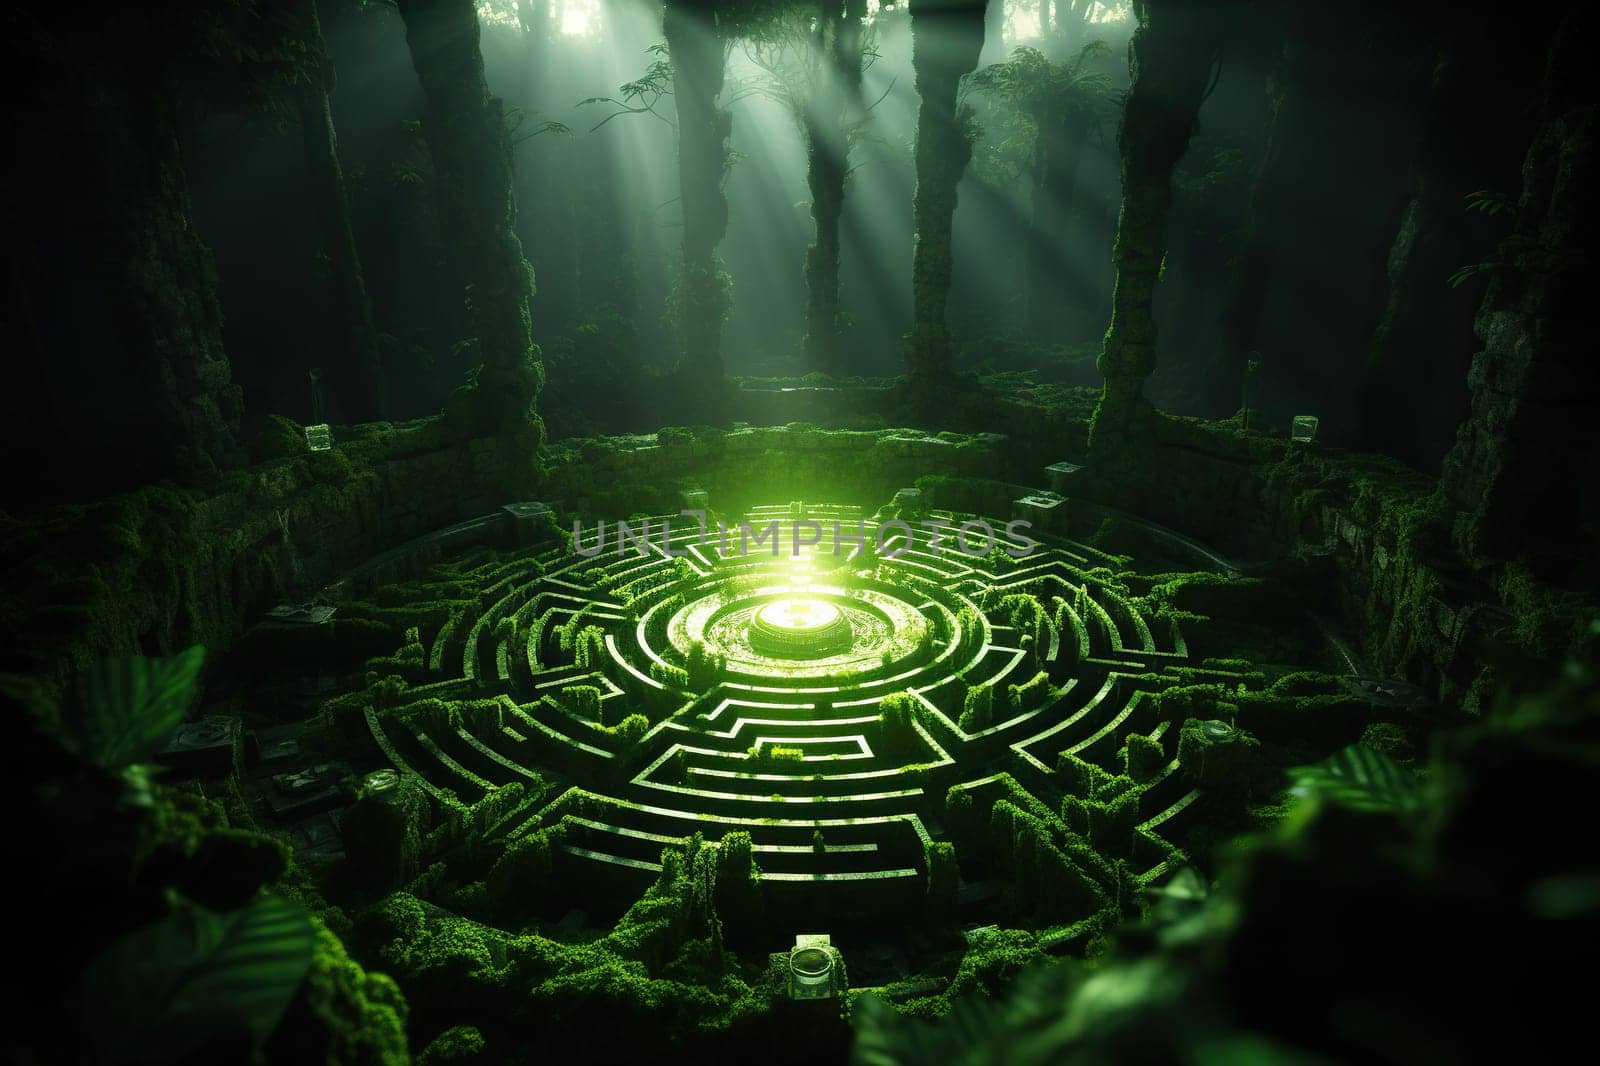 green labyrinth with a light source in the center.